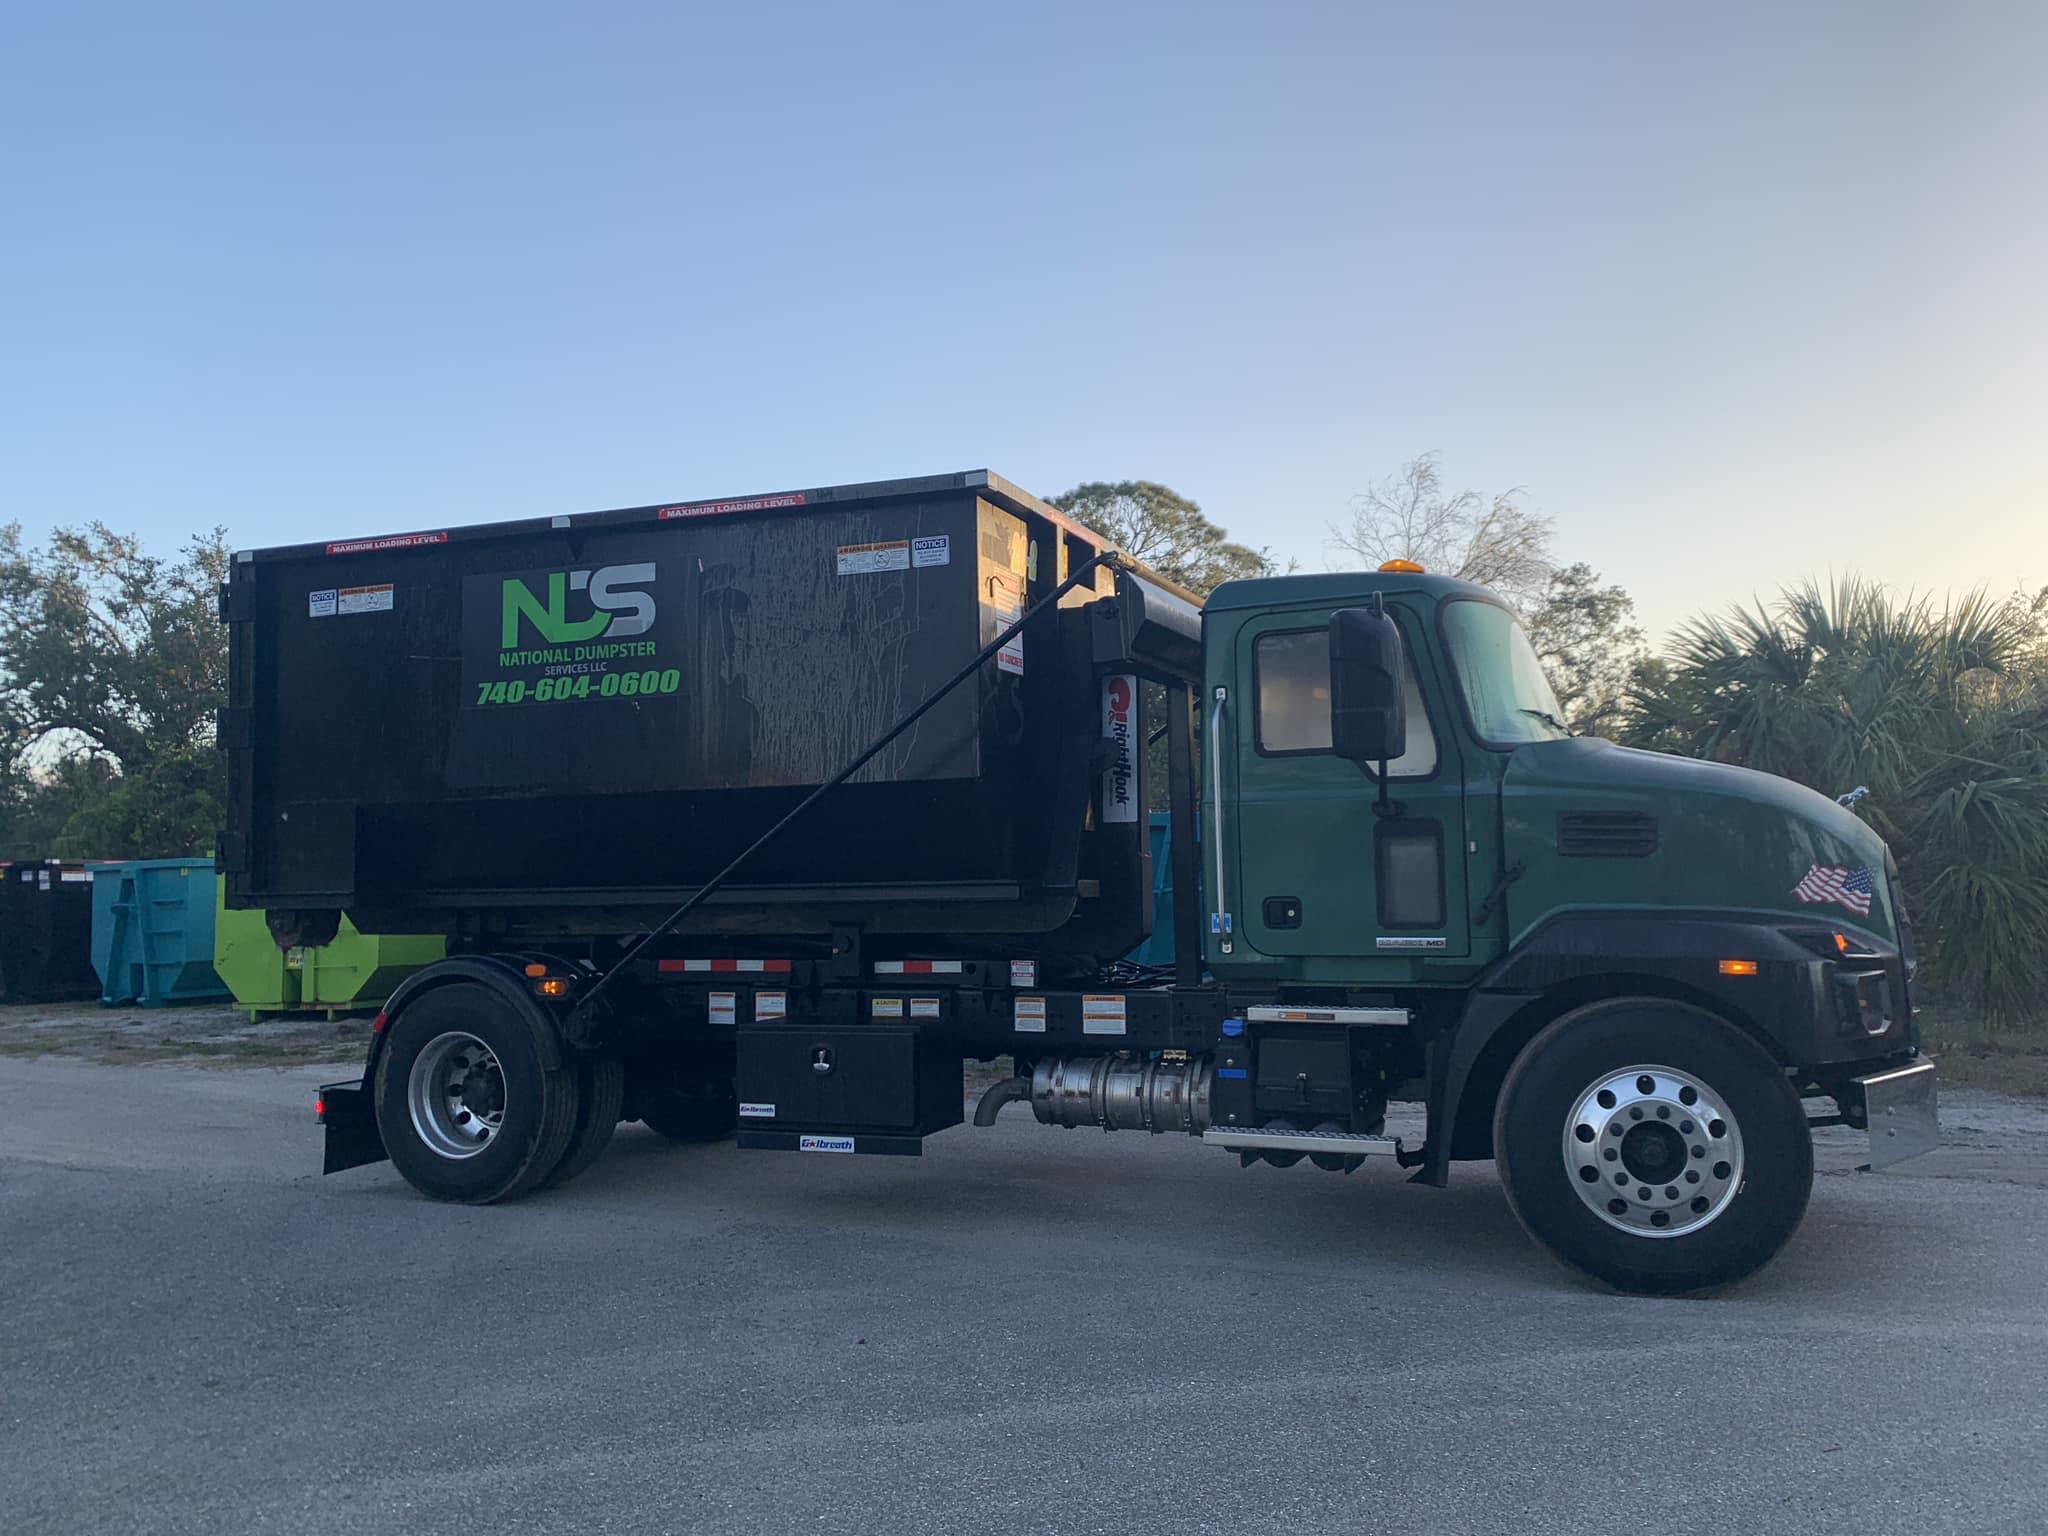 Cleveland FL Residential Dumpster Rental for Yard Waste and Outdoor Projects